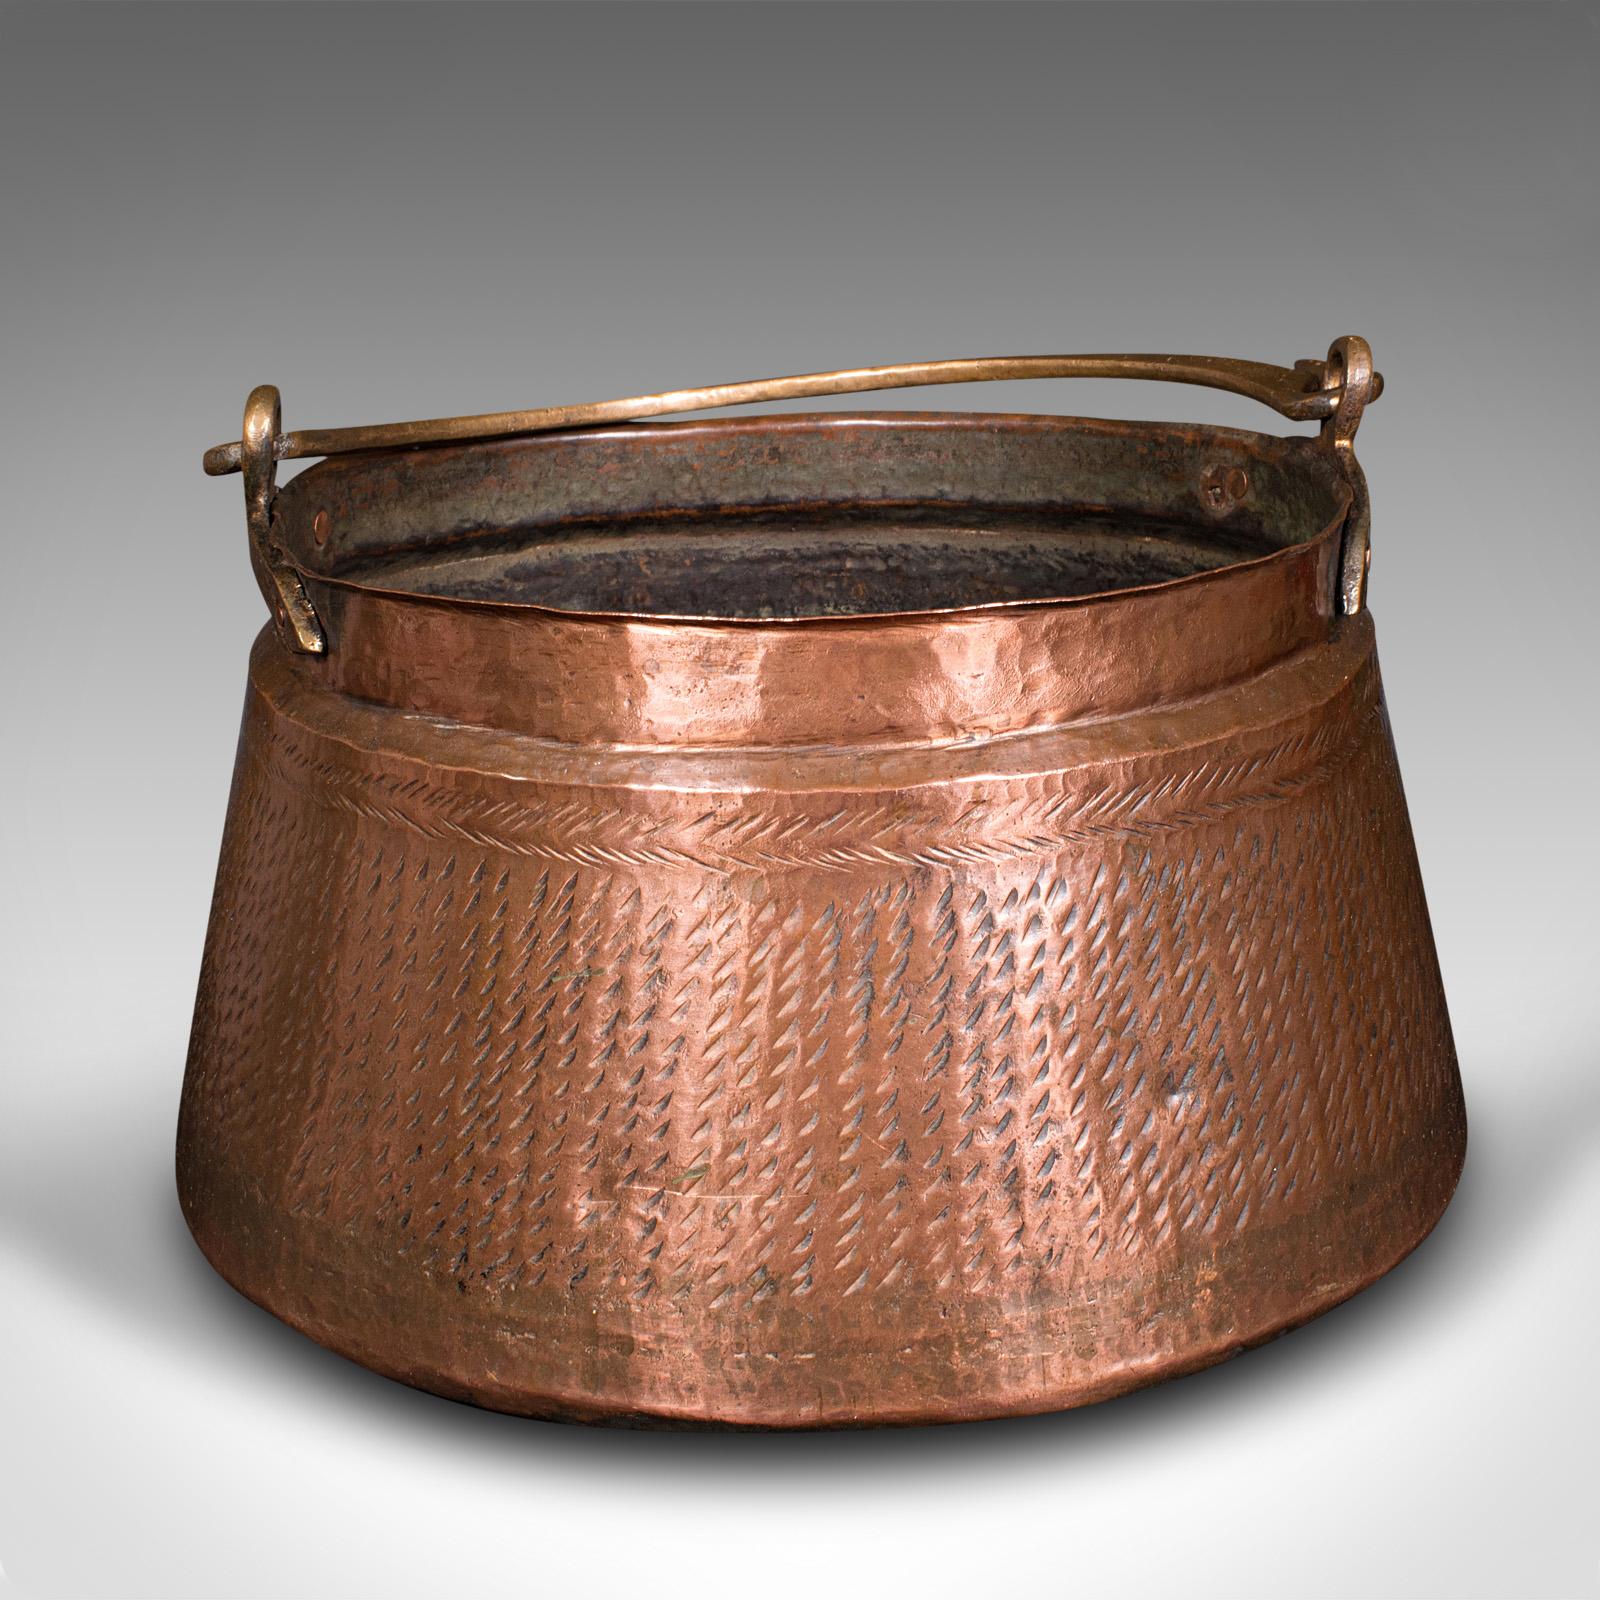 This is an antique fireside fuel basket. An Indian, copper and bronze handled daal pot, dating to the early Victorian period, circa 1850.

Appealingly original pan, ideal for fireside storage
Displays a desirable aged patina and in good original